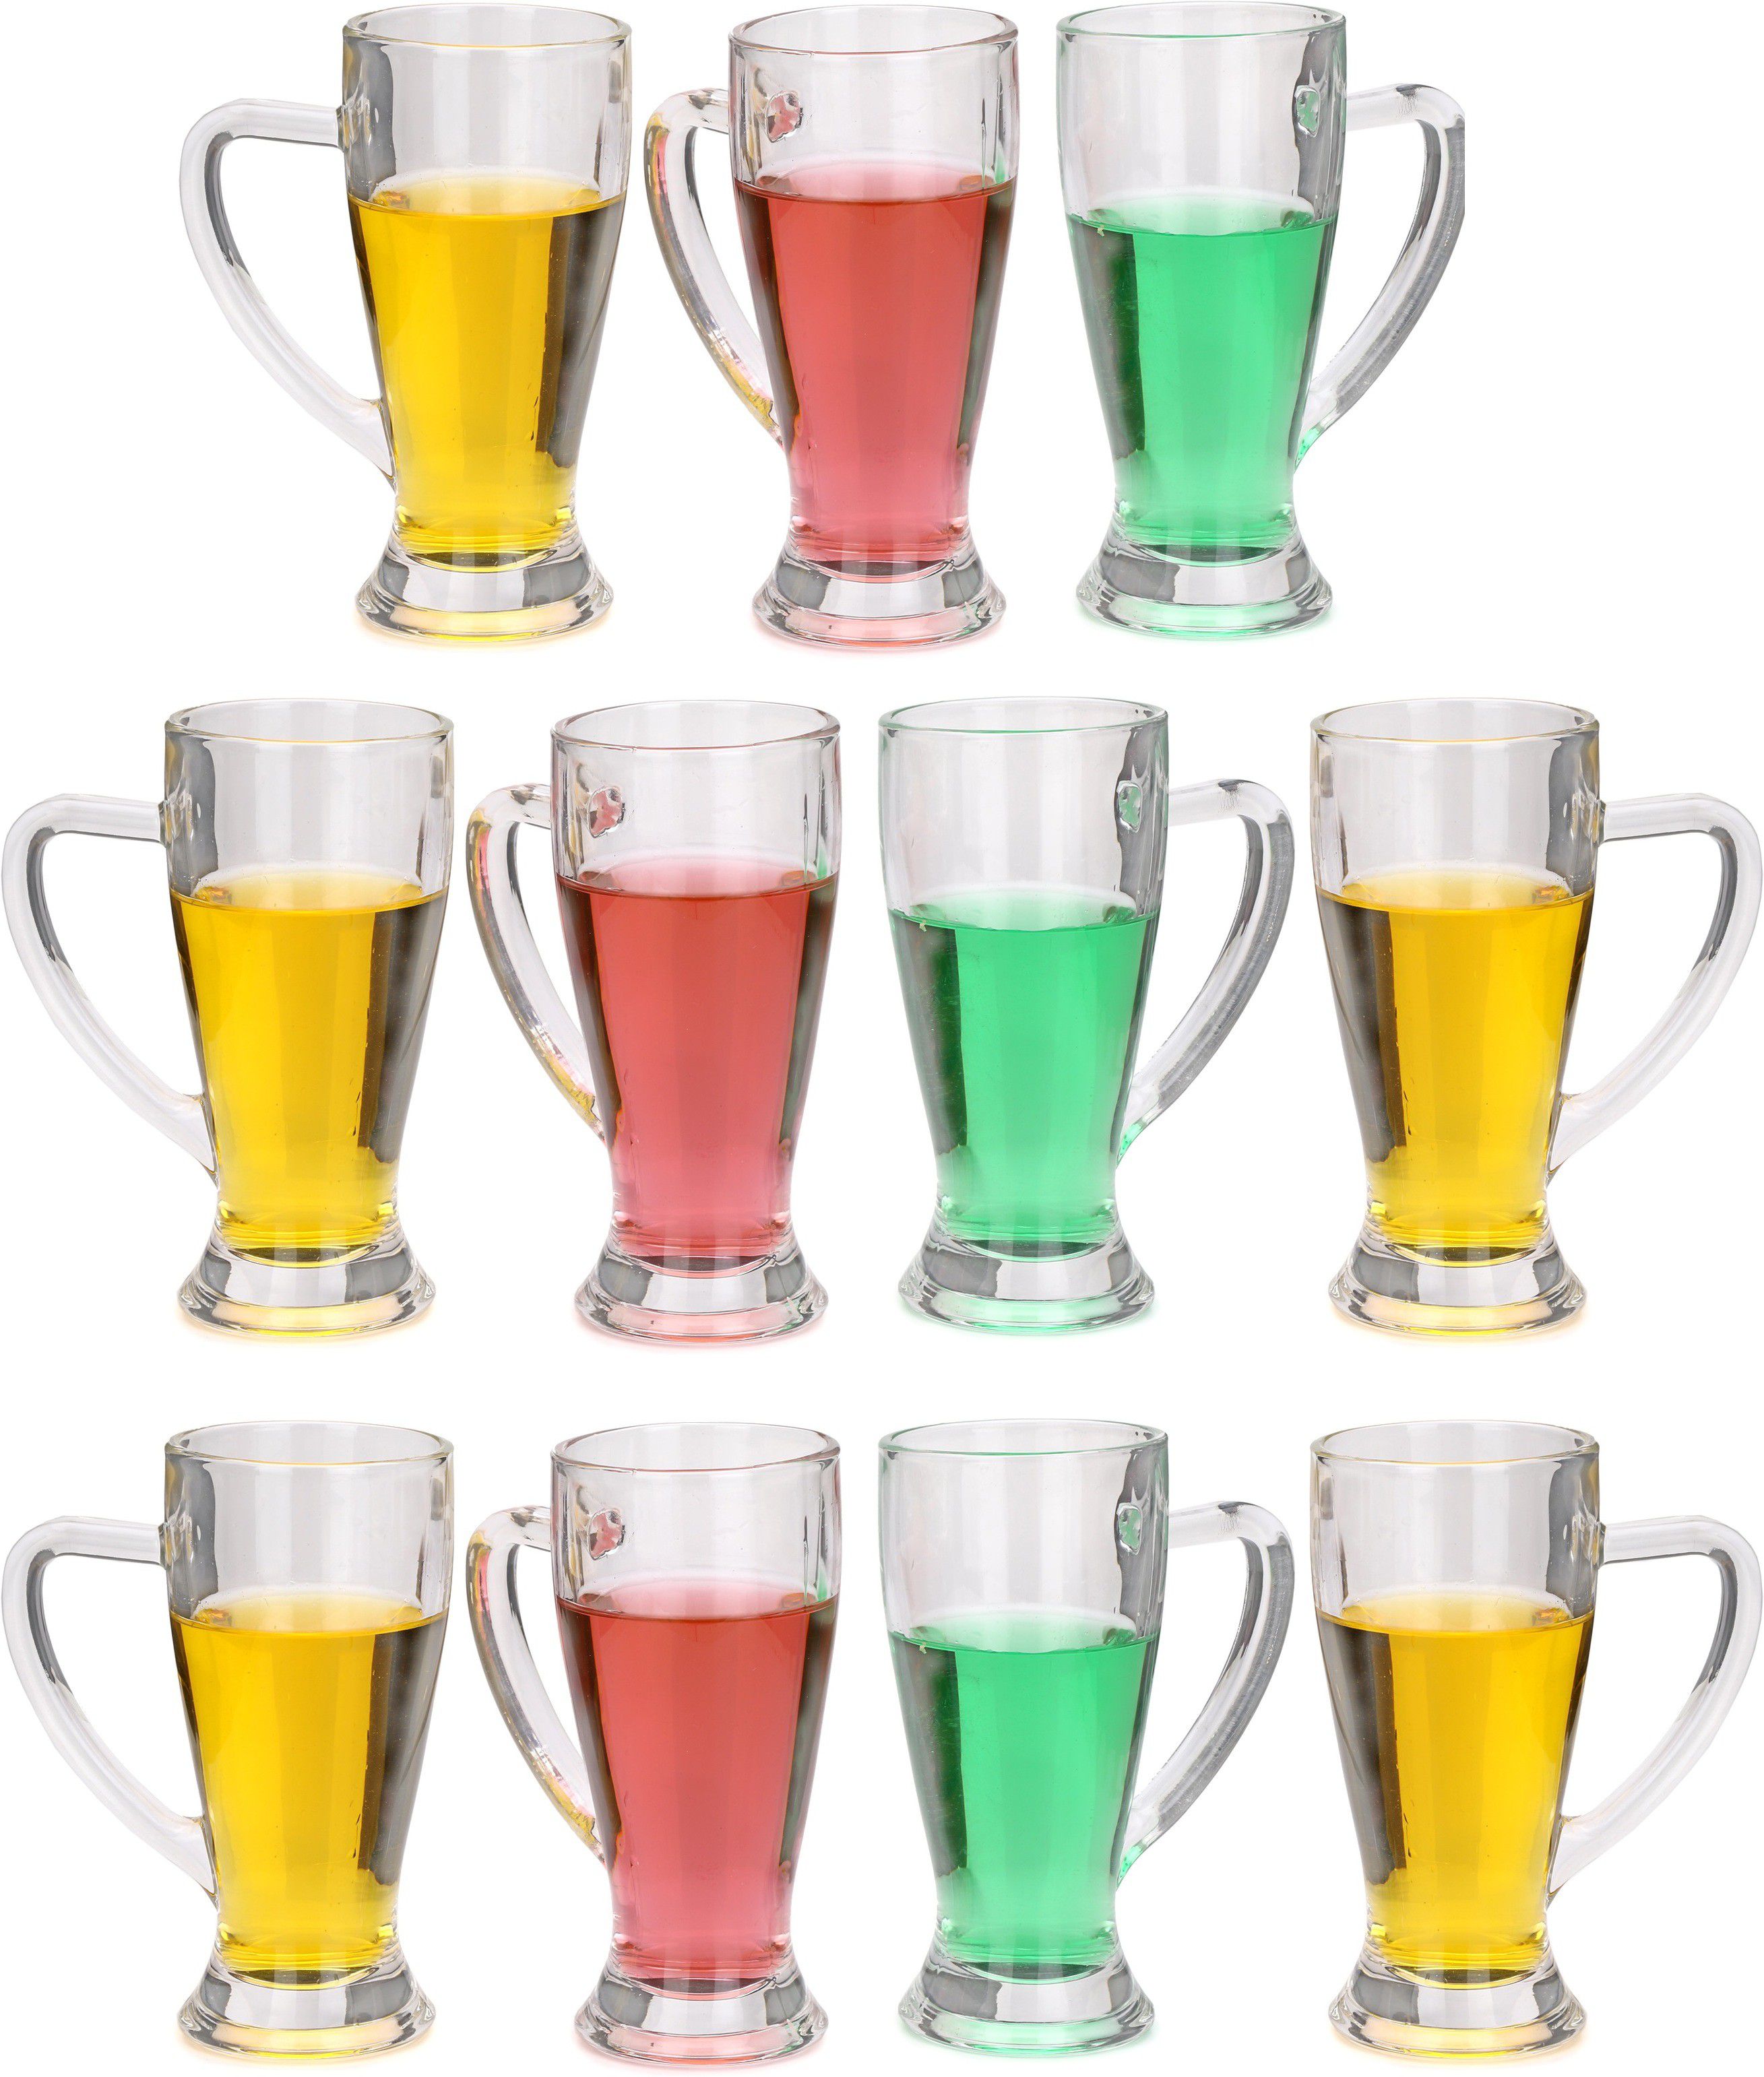     			1st Time A-12 Glass Beer Glasses & Mug 250 ml ( Pack of 11 )